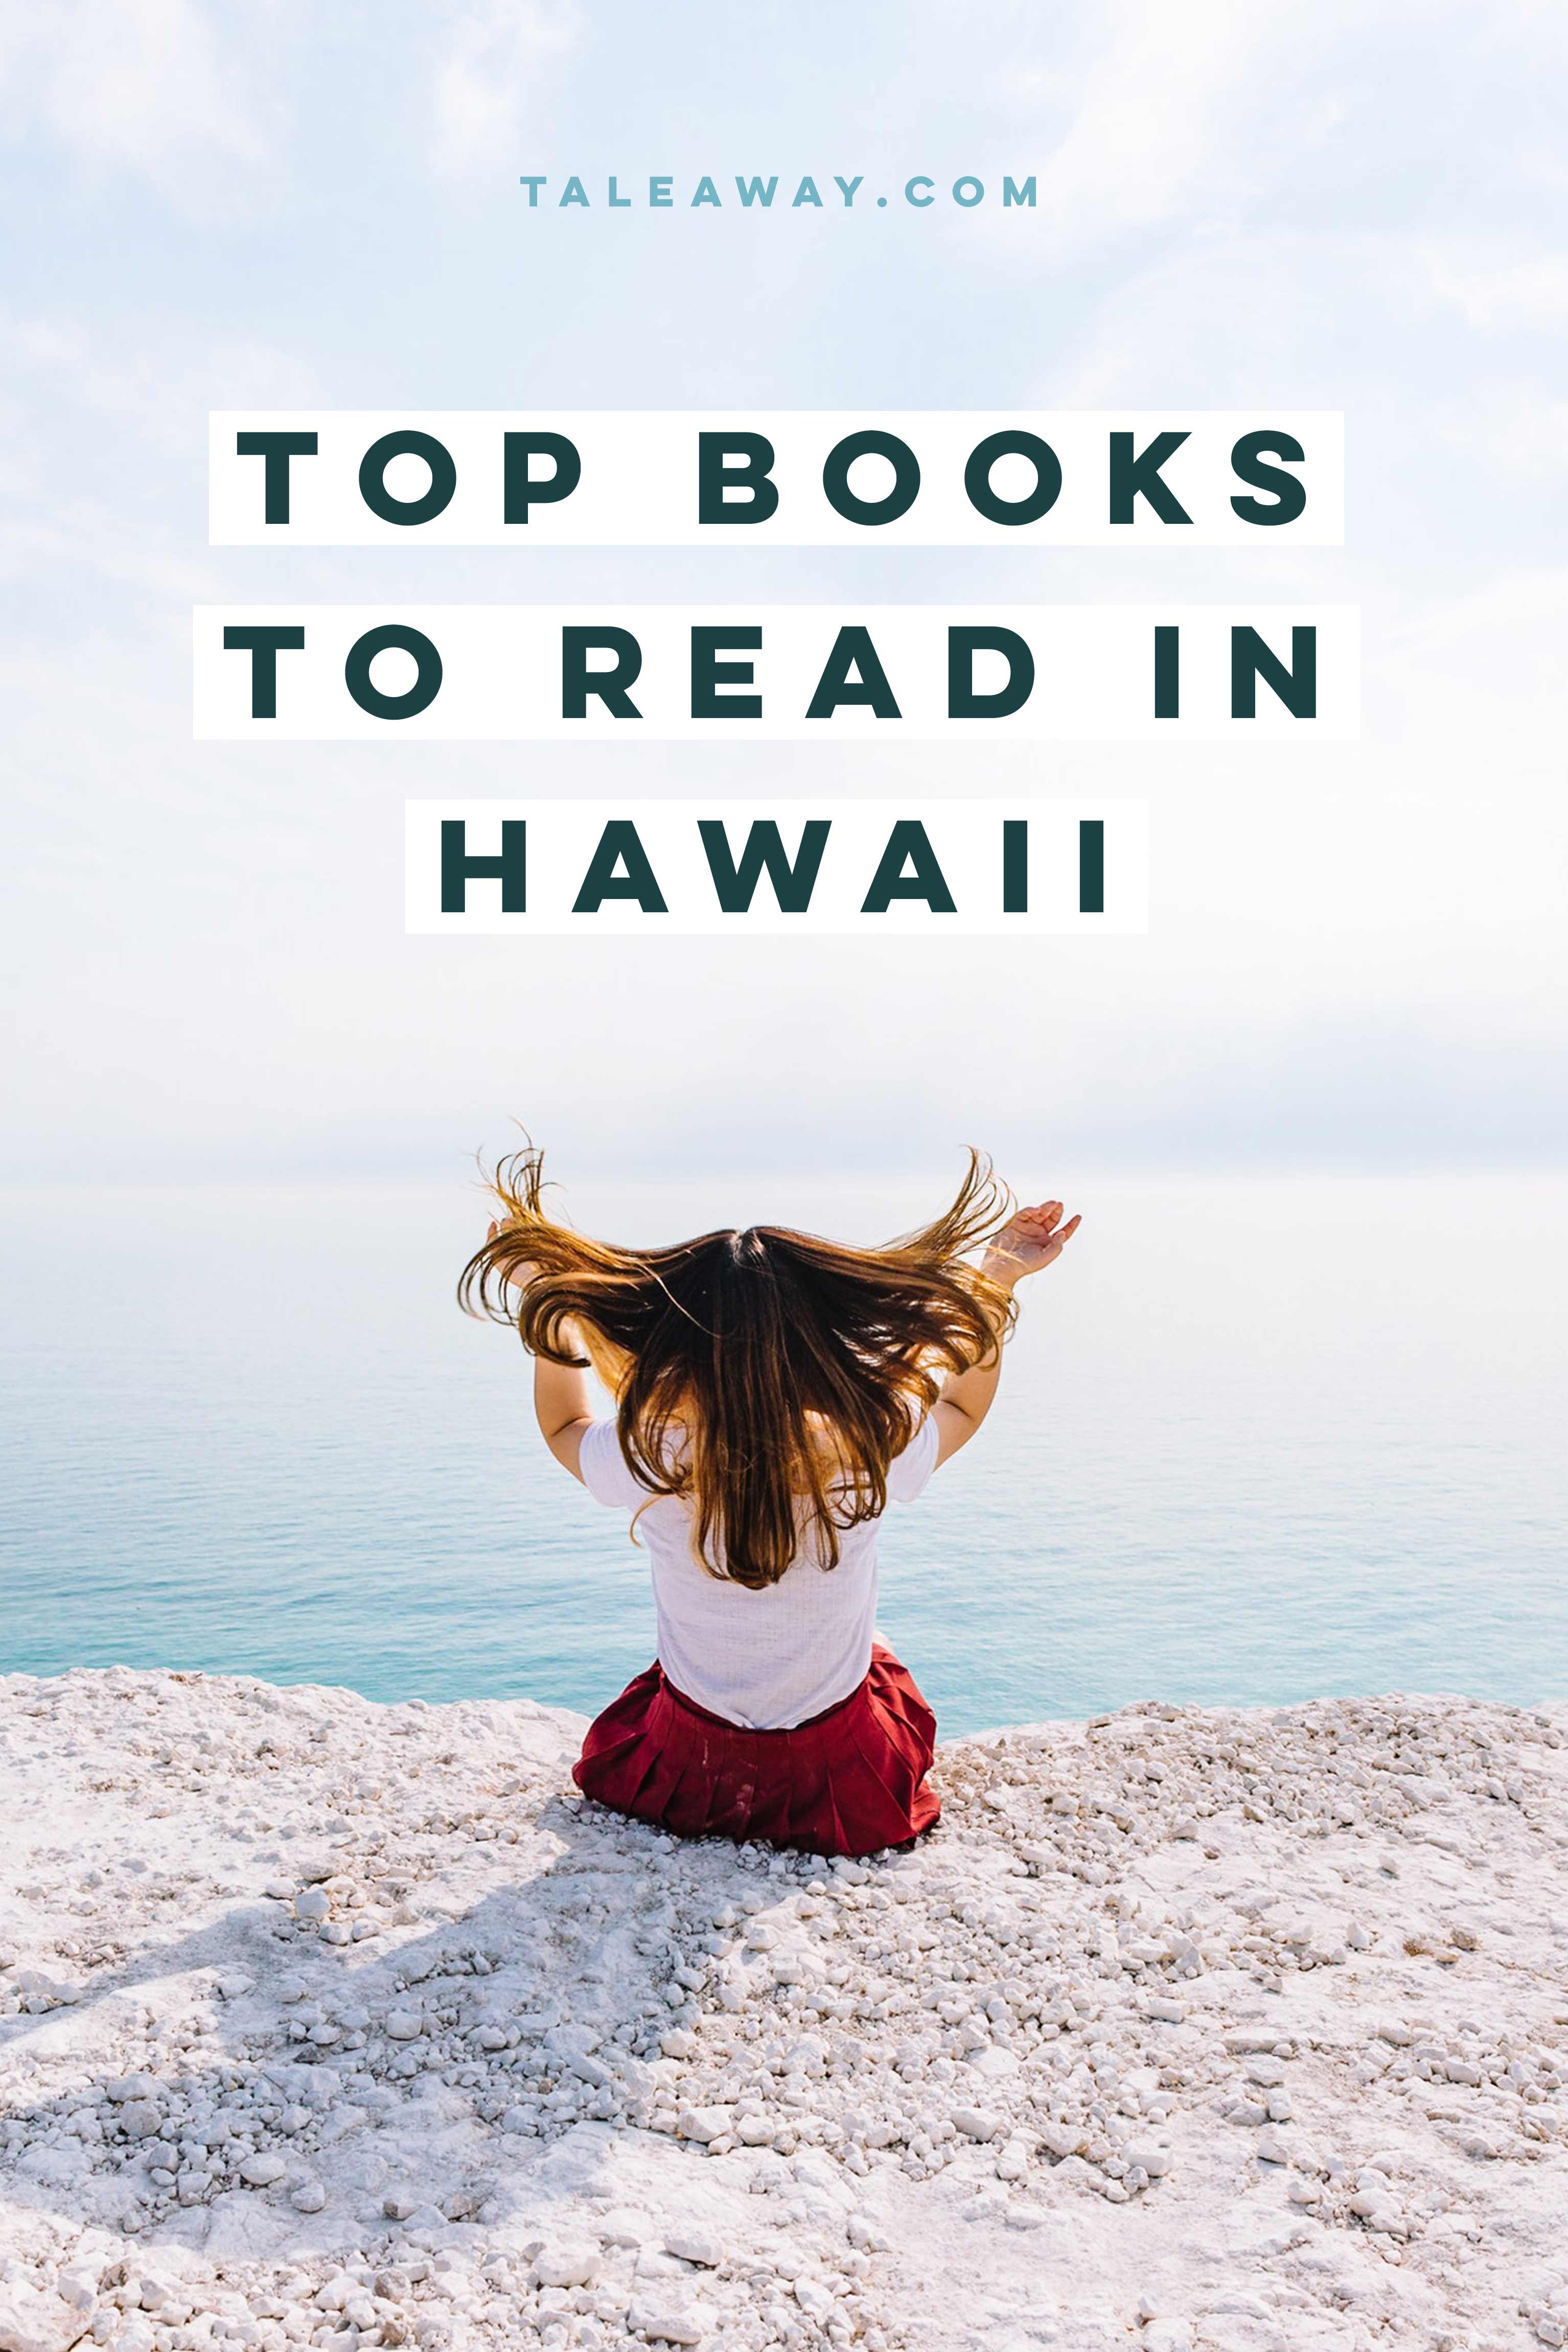 Books Set In Hawaii. For more books visit www.taleway.com to find books from around the world. Ideas for those who like to travel, both in life and in fiction. #books #novels #hawaii #travel #fiction #bookstoread #wanderlust